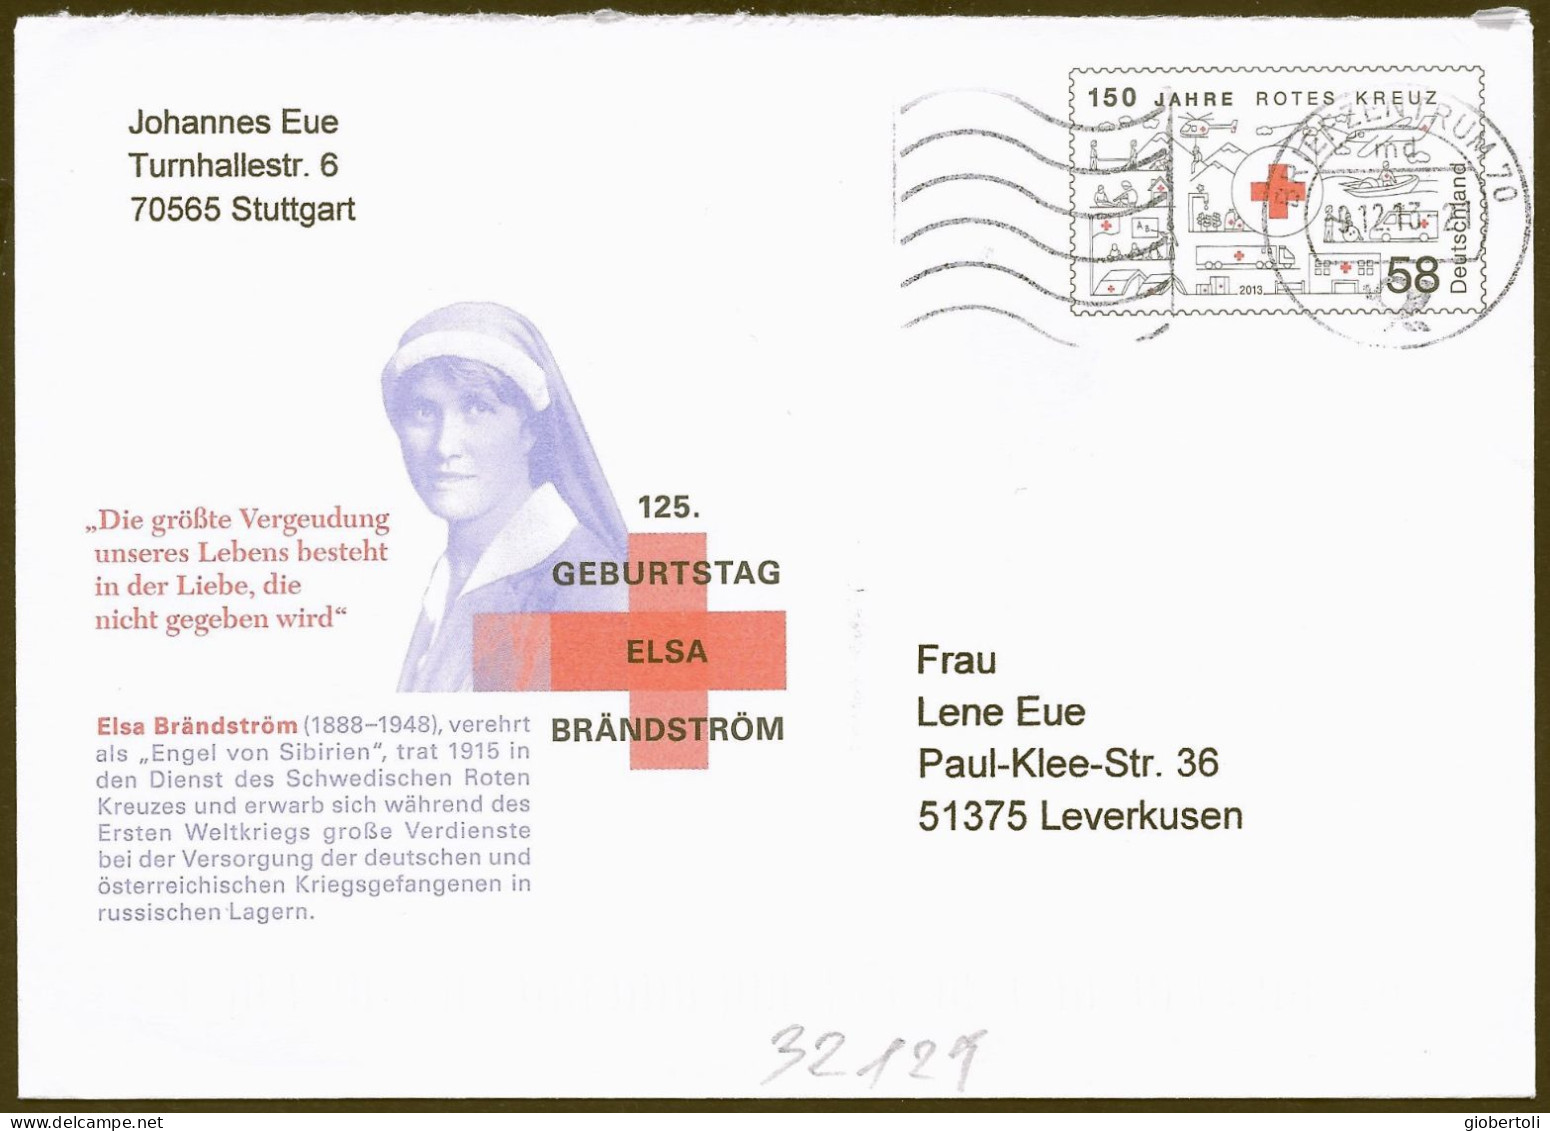 Germania/Germany/Allemagne: Intero, Stationery, Entier, 150° Croce Rossa, 150th Red Cross, 150e Croix-Rouge - Croce Rossa